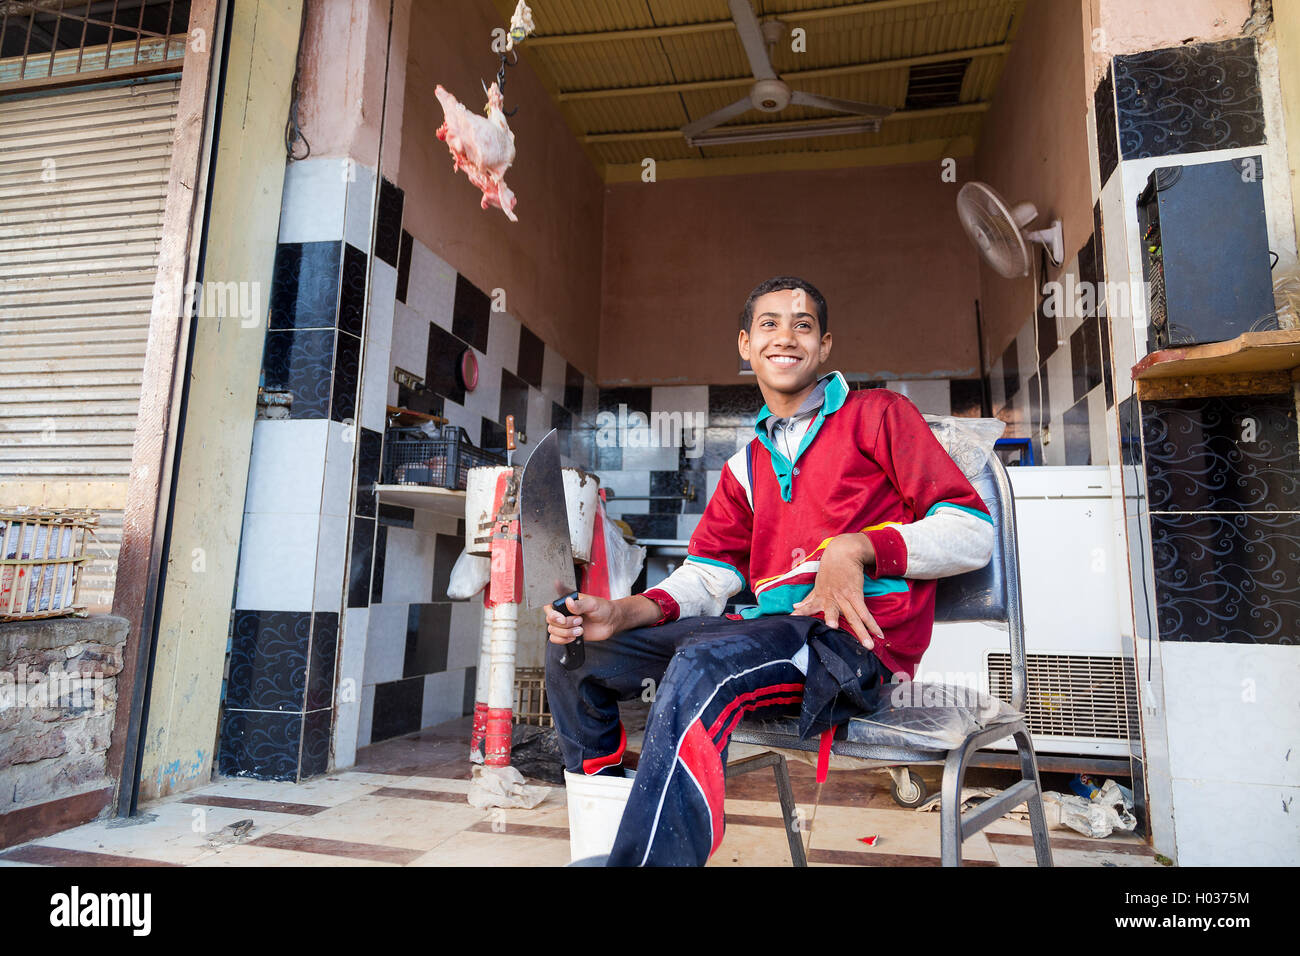 DARAW, EGYPT - FEBRUARY 6, 2016: Young local butcher sitting on the chair holding knife in front of butcher shop. Stock Photo